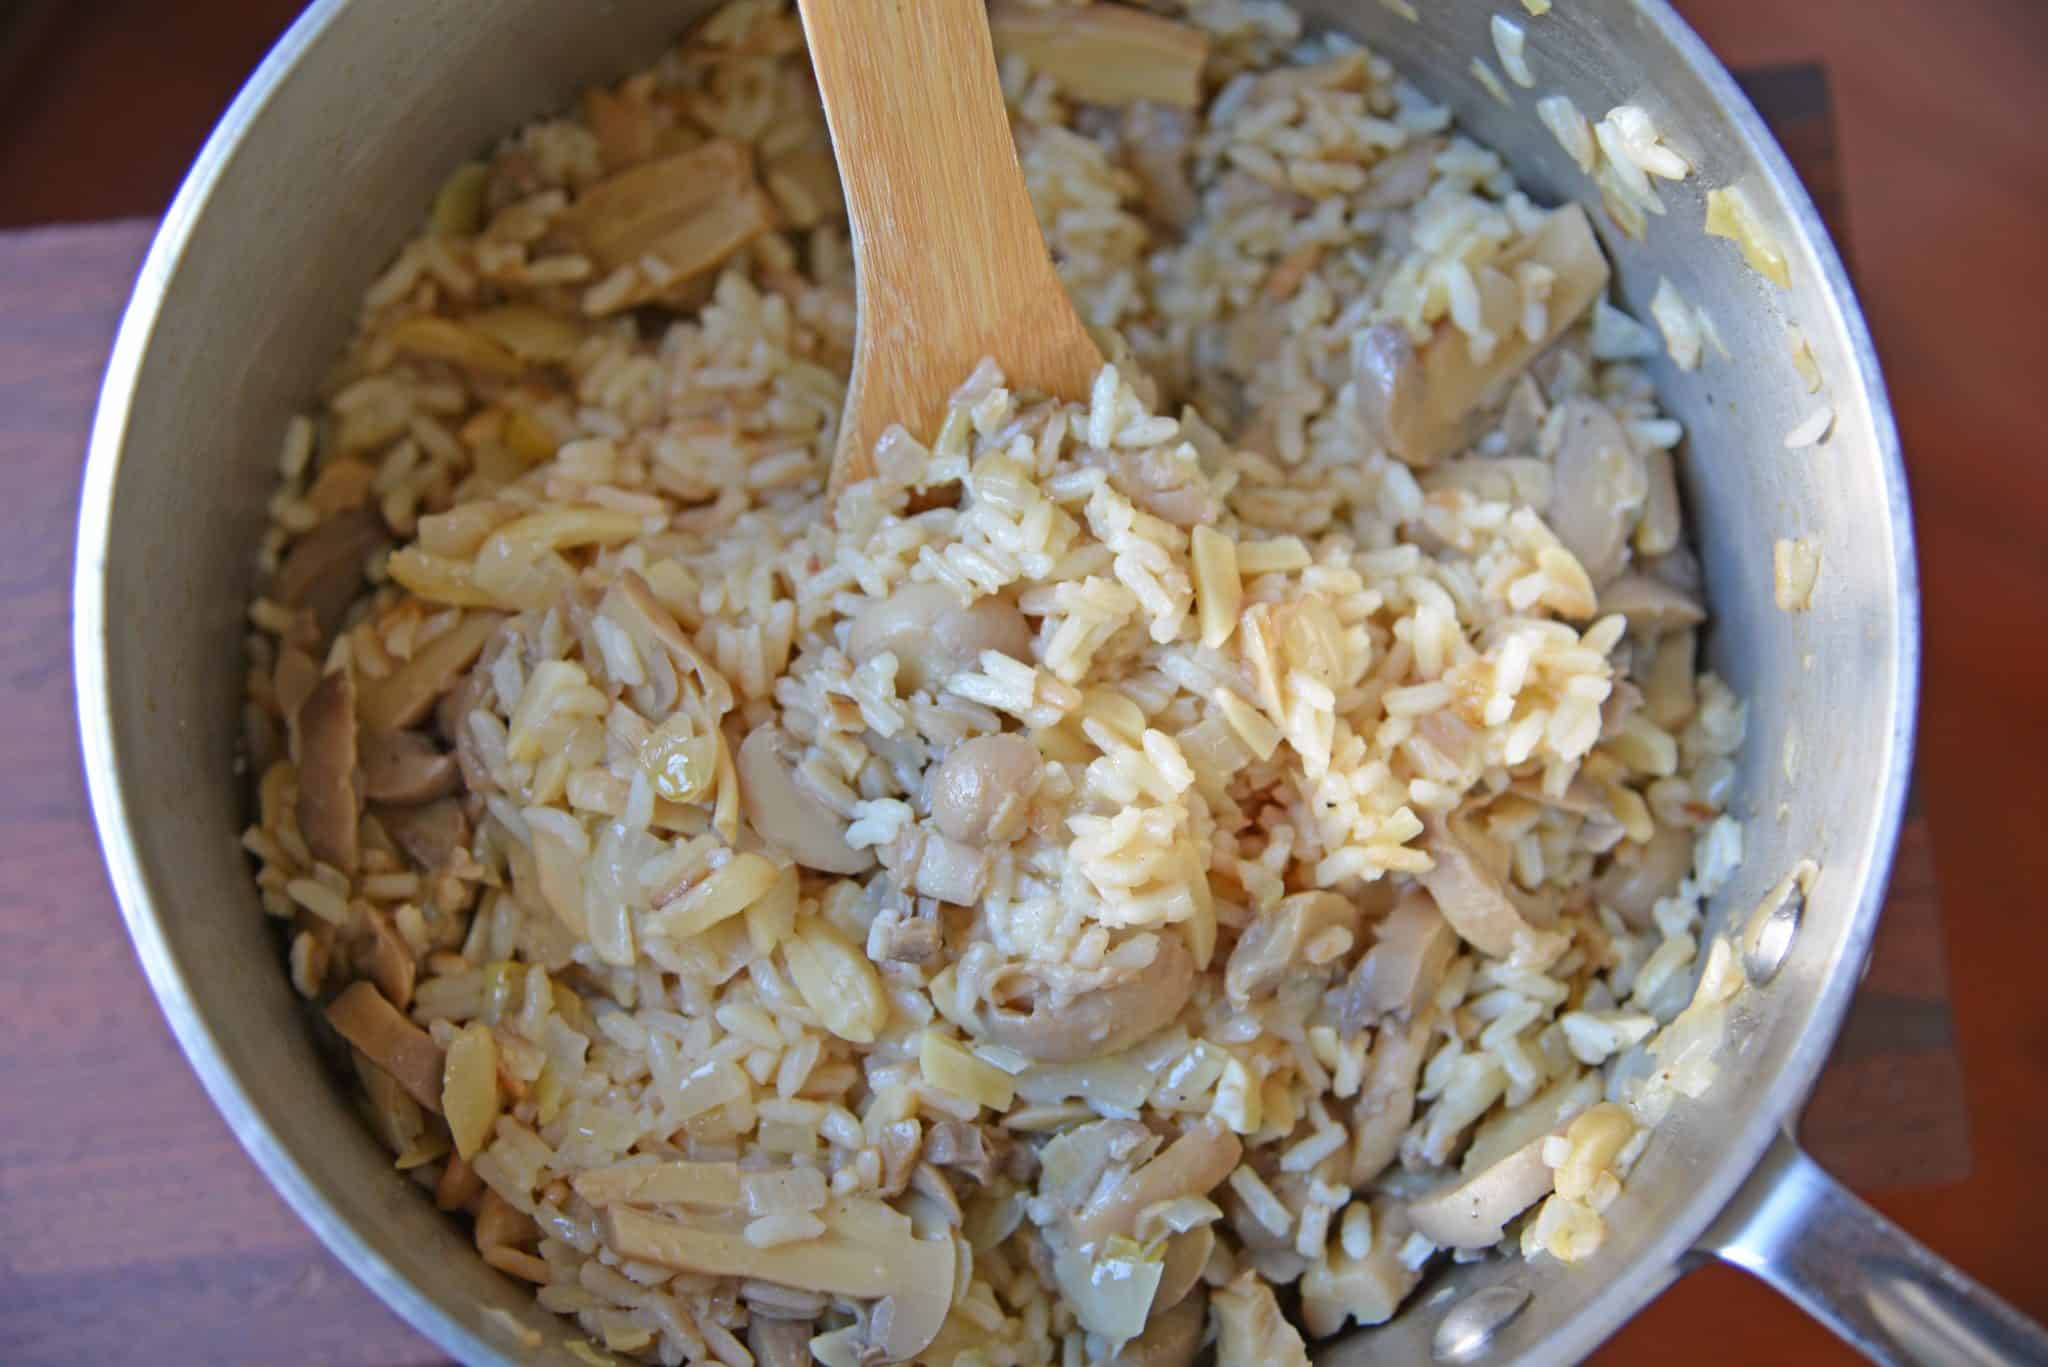 Almond Rice Pilaf is an easy side dish made with crunchy almonds, mushrooms and savory chicken broth and lemon juice to give it loads of flavor! An easy rice recipe the whole family will love. #ricepilafrecipe #easysidedish www.savoryexperiments.com 